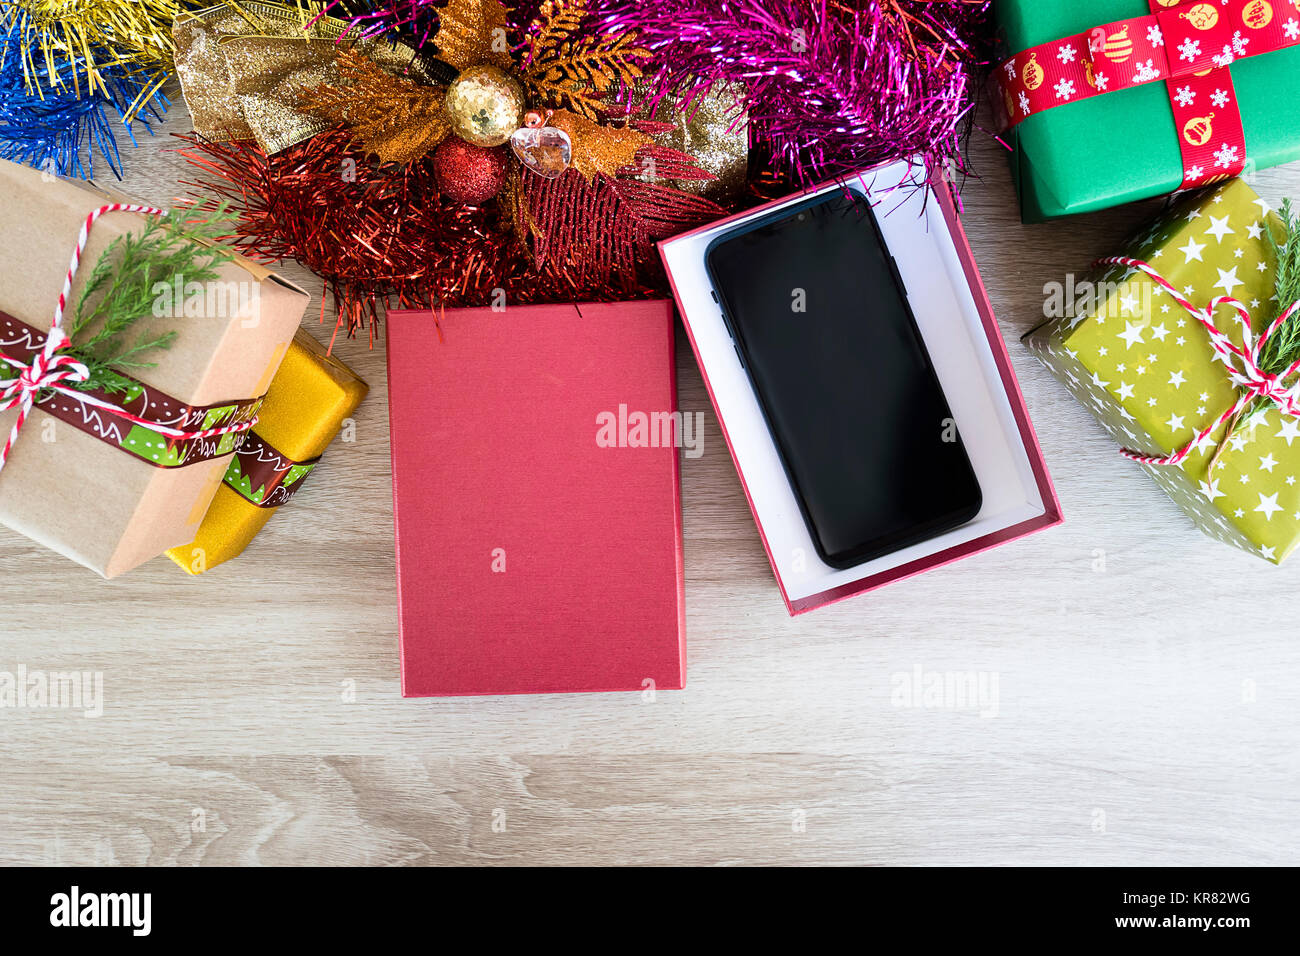 Bangkok , Thailand - December 15, 2017: New Apple iPhone X in Gift box,great holiday gift ideas Christmas or New Year gift for all people. Stock Photo